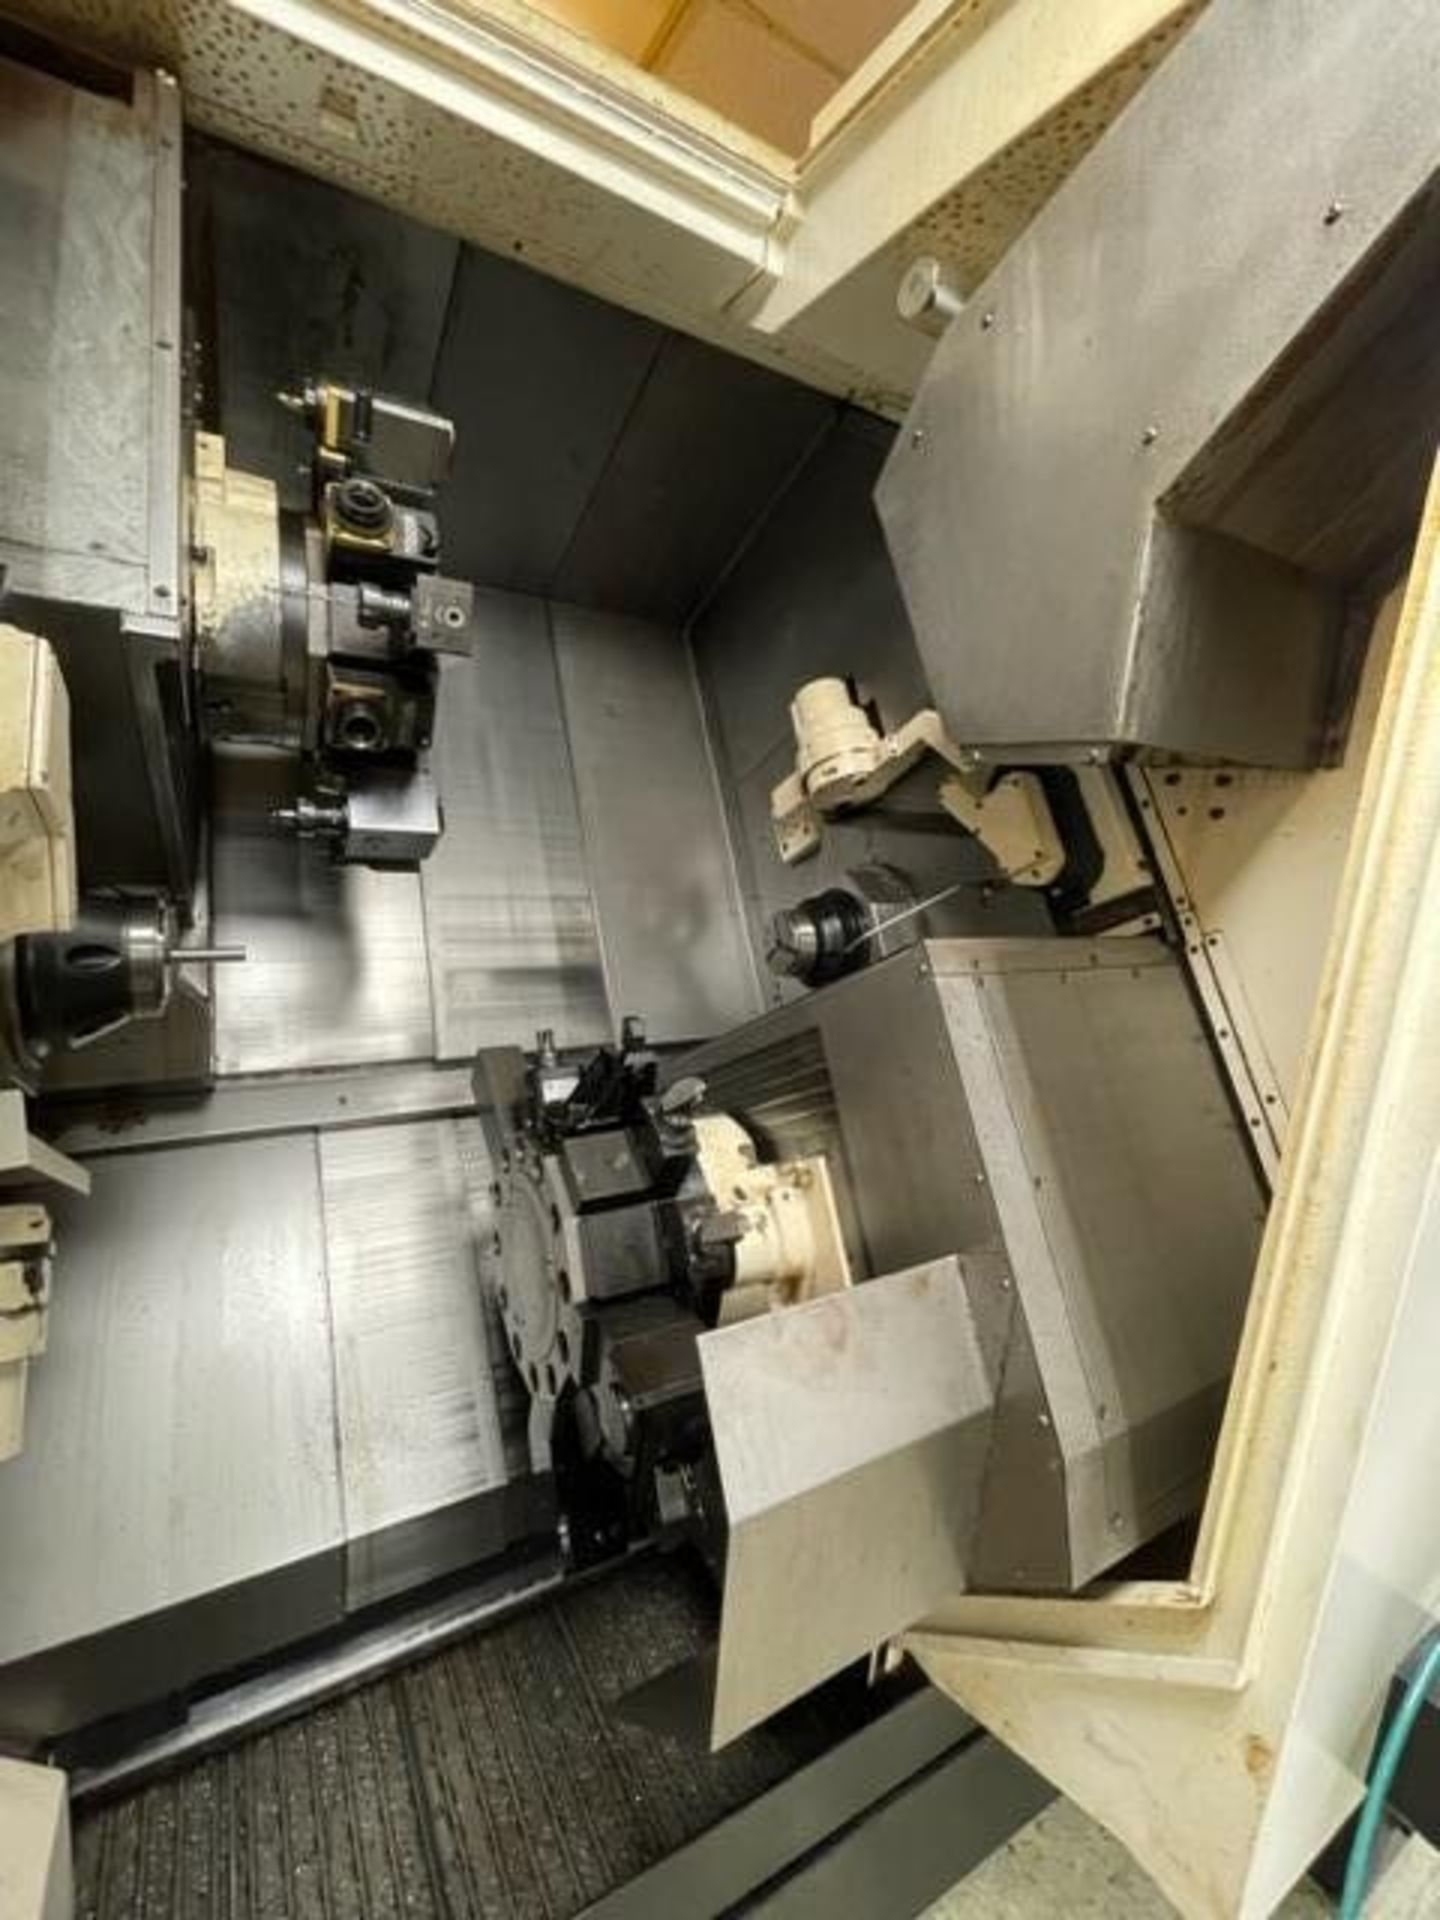 2019 MAZAK HQR-250MSY DUAL SPINDLE, DUAL TURRET CNC TURNING CENTER, WITH BAR FEEDER - Image 5 of 12